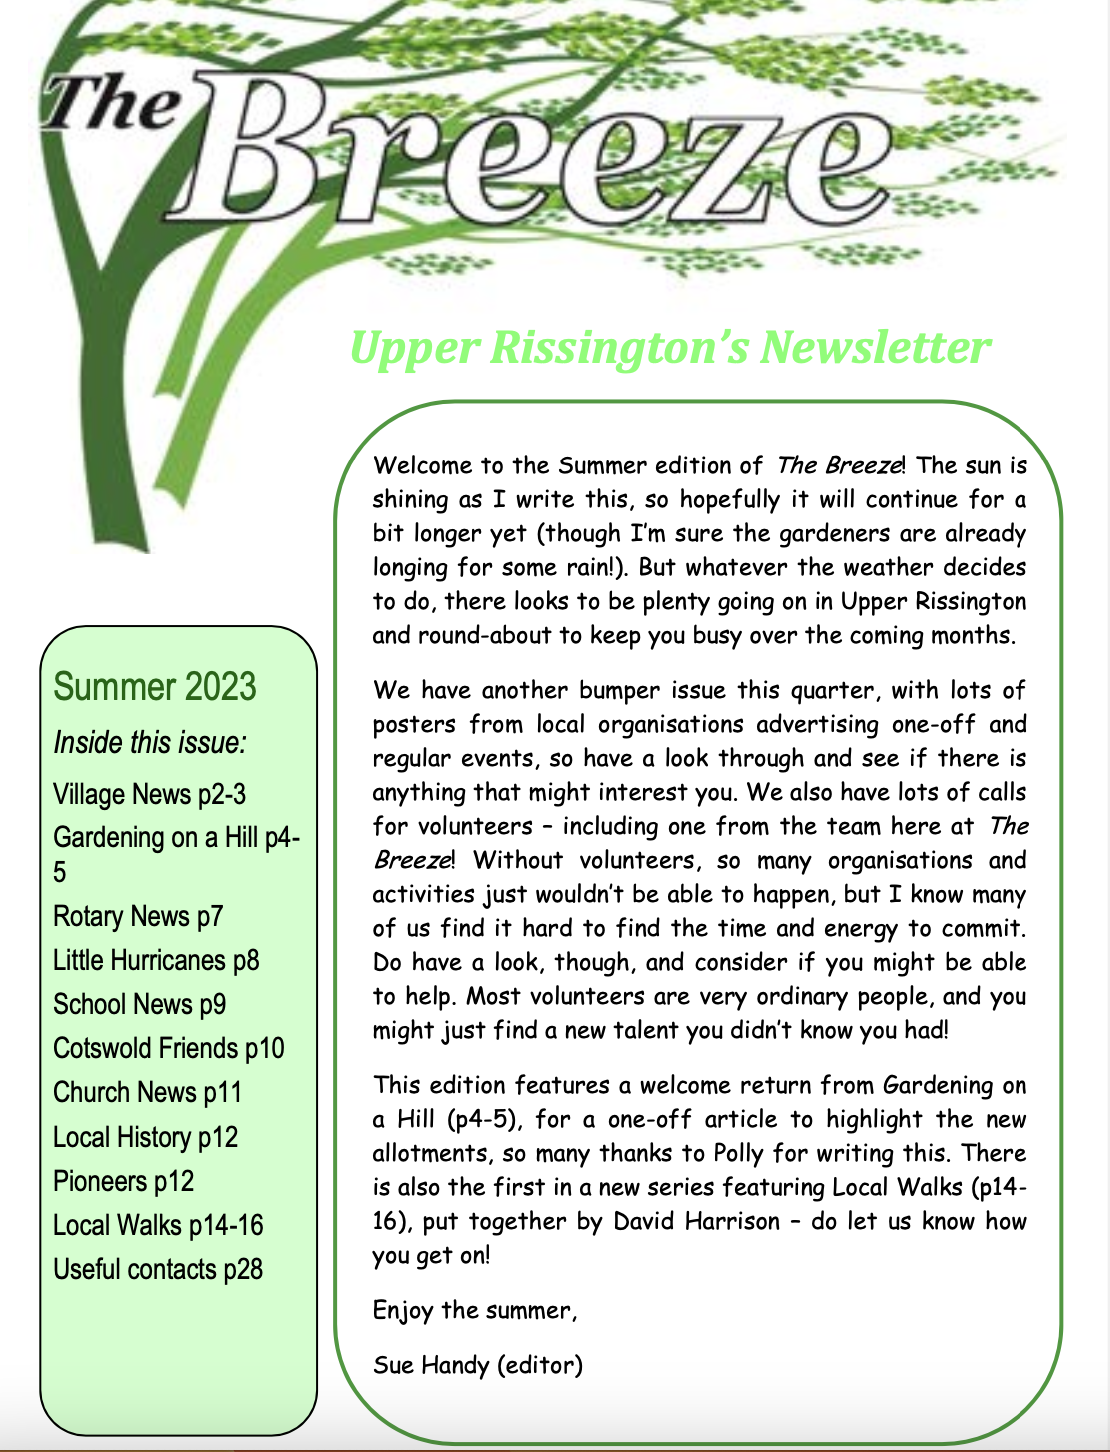 Cover page of the Summer 2023 edition of The Breeze newsletter